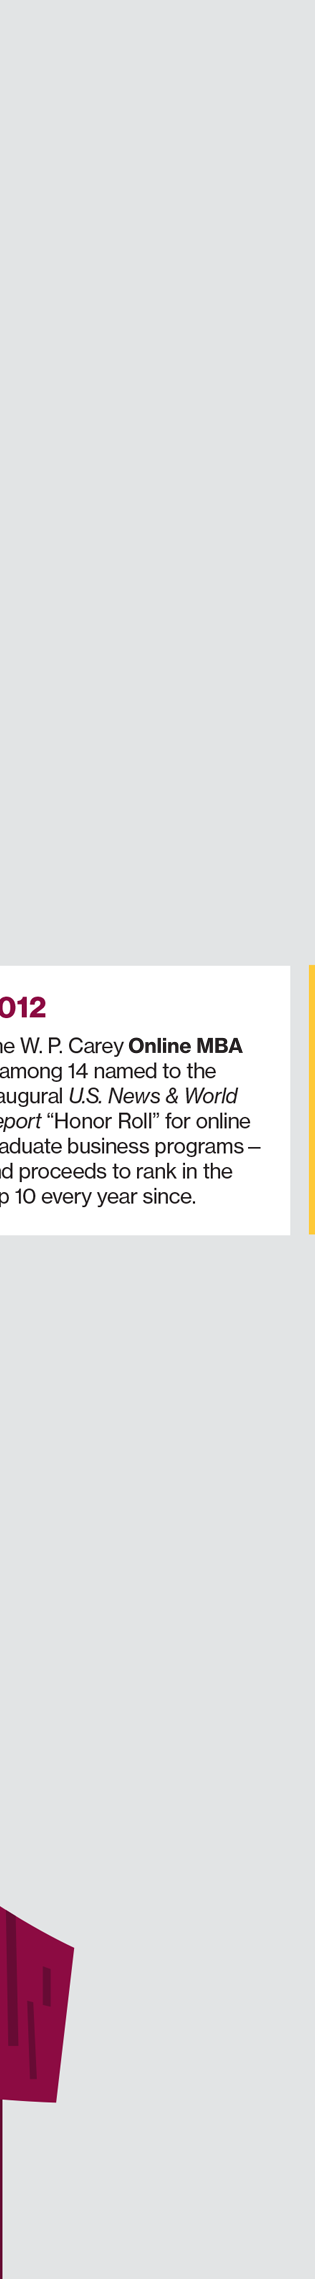 2012 The W. P. Carey Online MBA is among 14 named to the inaugural U.S. News & World Report “Honor Roll” for online graduate business programs— and proceeds to rank in the top 10 every year since.